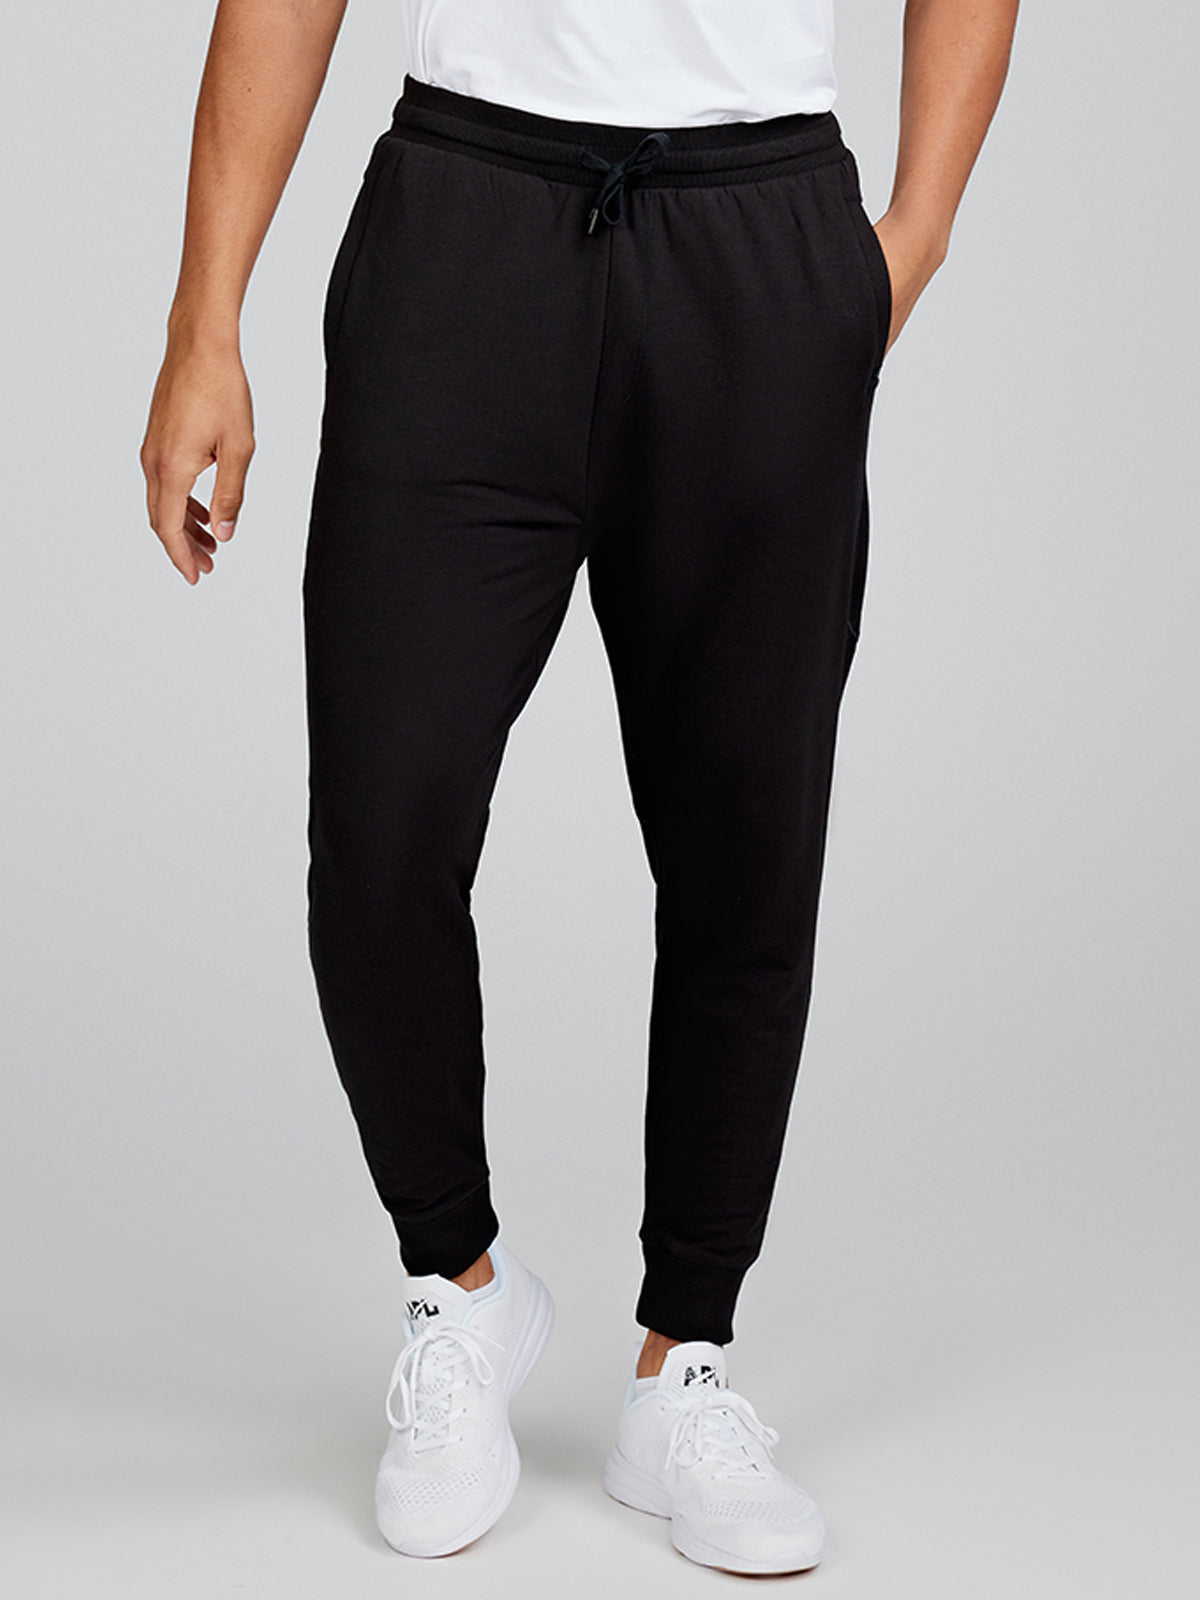 THE GYM PEOPLE Women's Tapered Joggers Pants Palestine